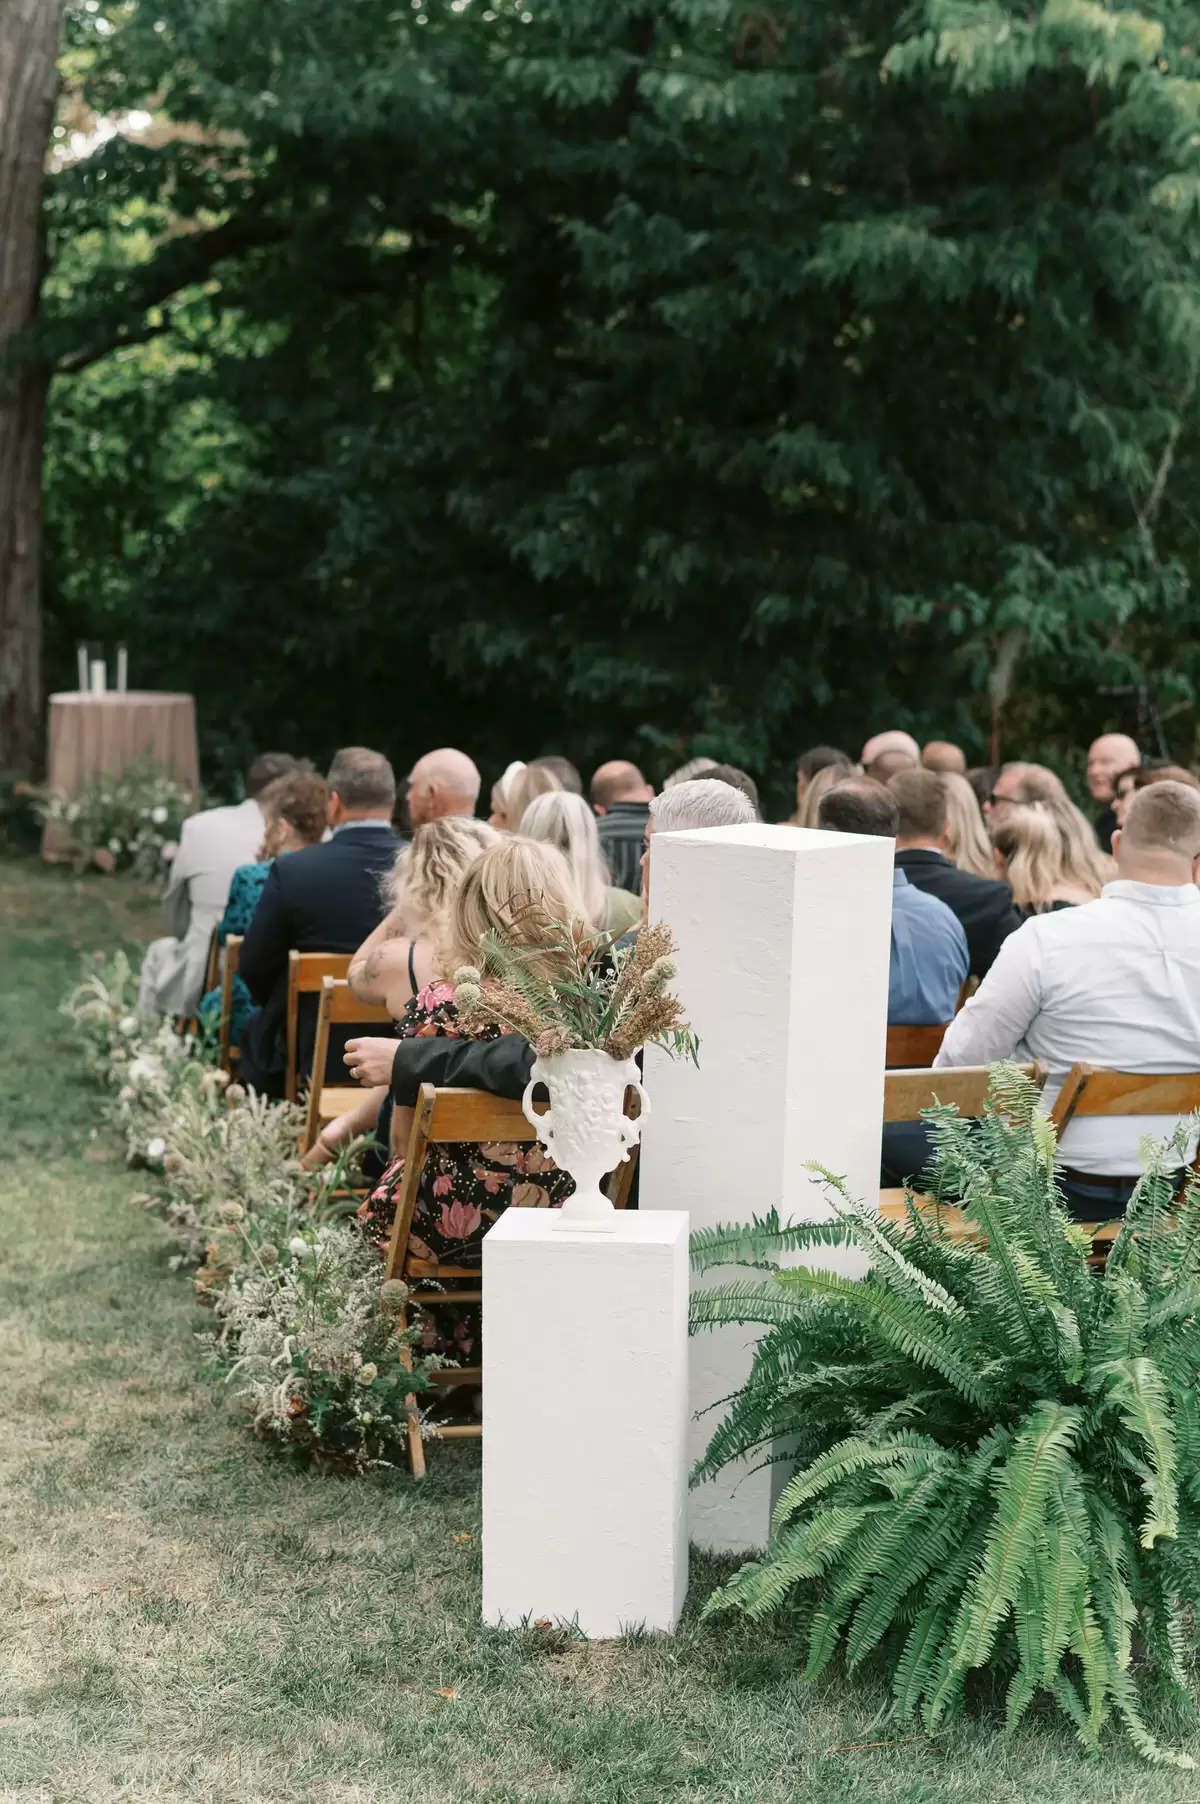 An Alfresco Marriage ceremony at Artisan Acres Property ⋆ Ruffled